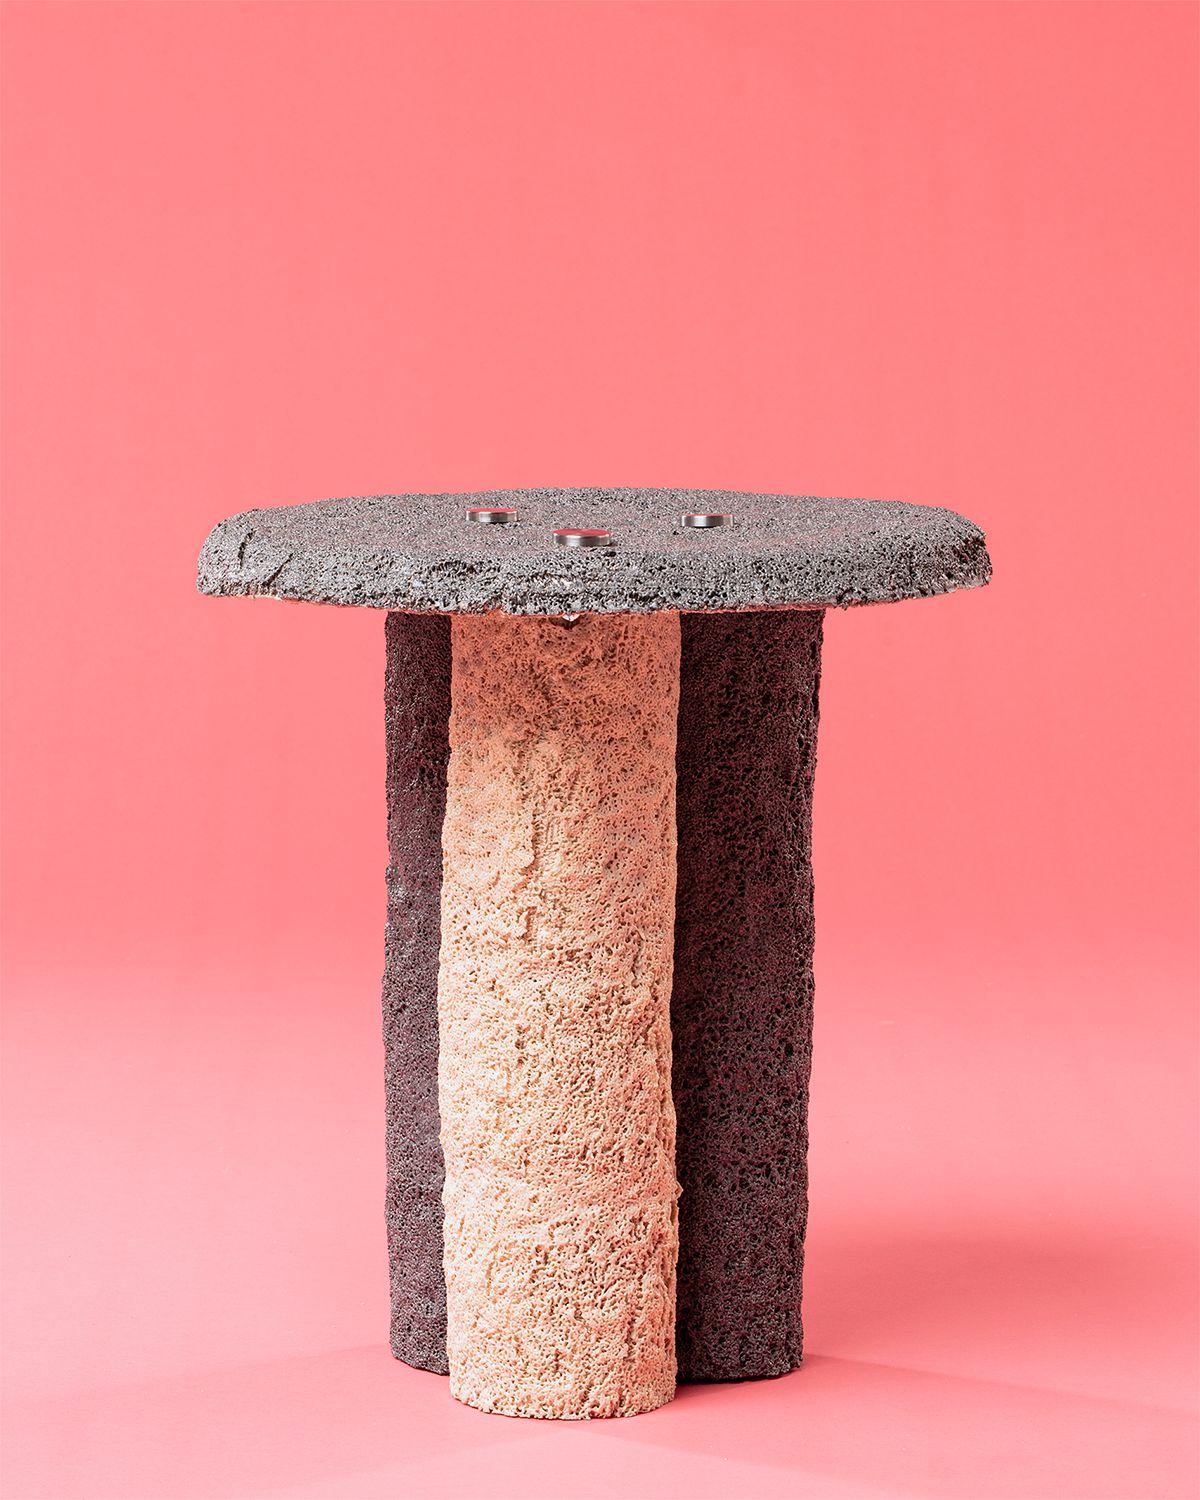 Carpet matter side table by Riccardo Cenedella.
Dimensions: 45 x 45 x H 47 cm.
Materials: Waste Synthetic carpet.

I am Riccardo Cenedella I graduated in Product Design from Politecnico di Torino in 2016 and straight after my graduation I